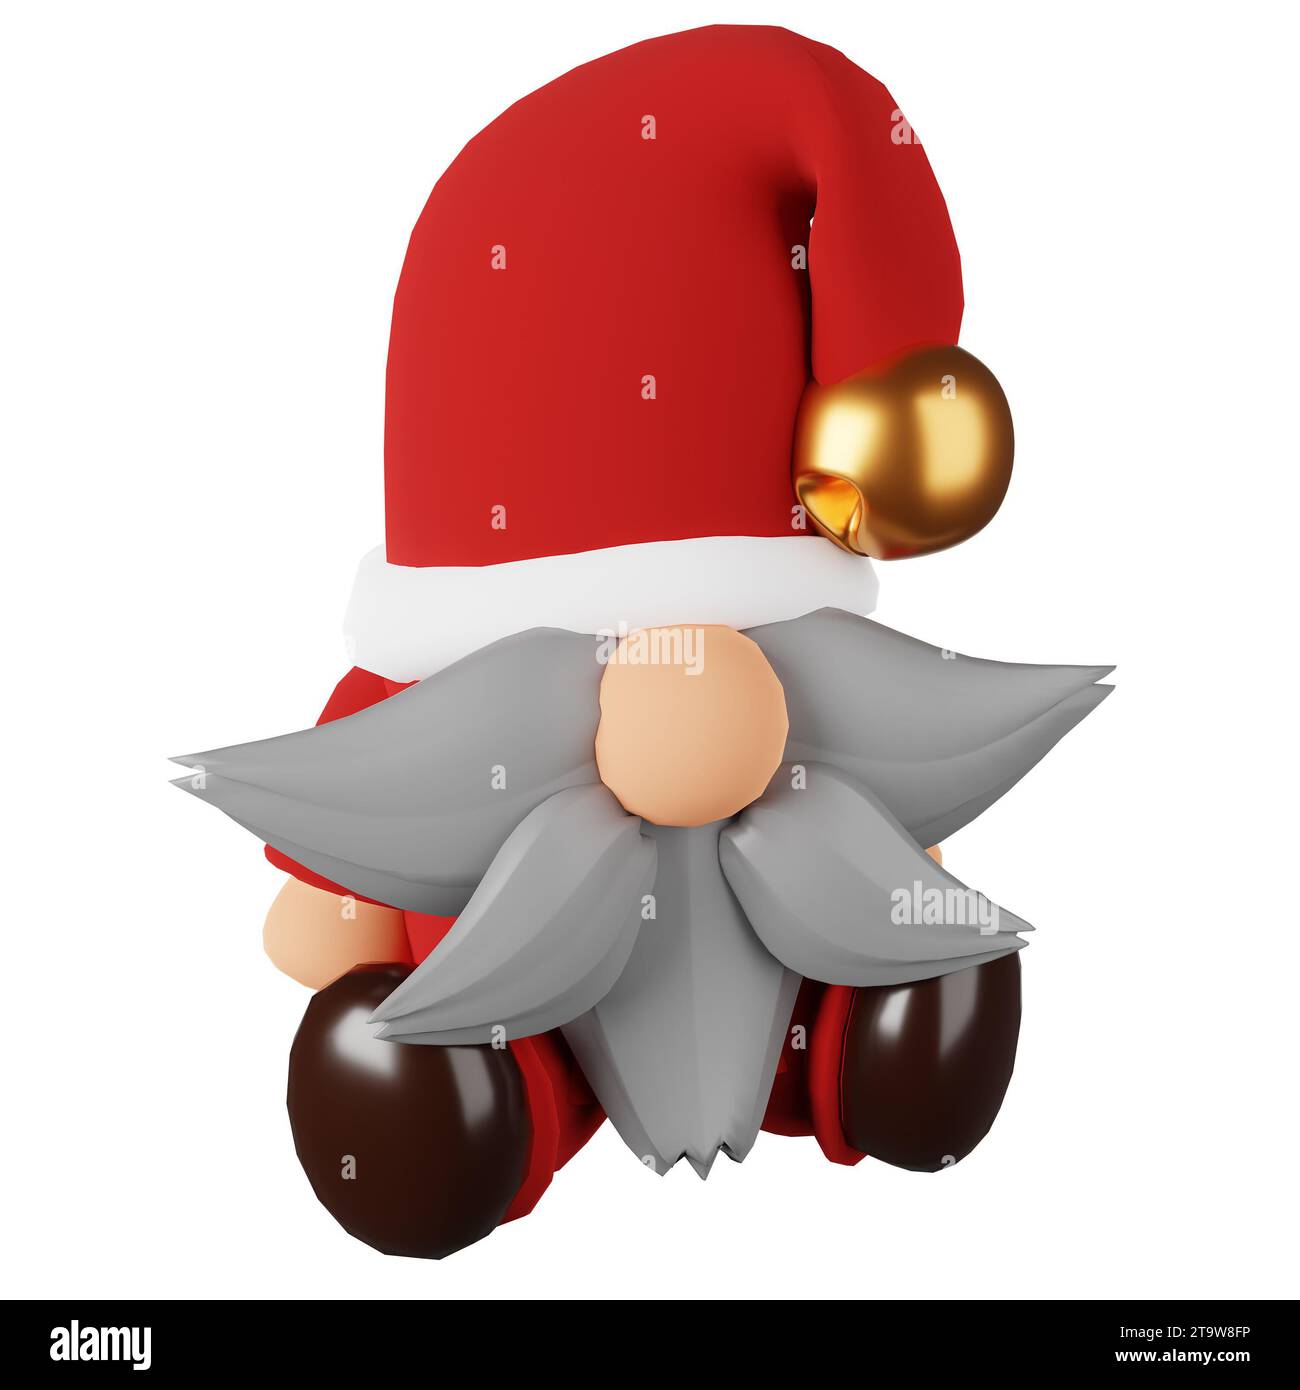 Joyful Christmas dwarf adds merriment to festivities, with a twinkle in his eye and a sack full of holiday cheer. Stock Photo